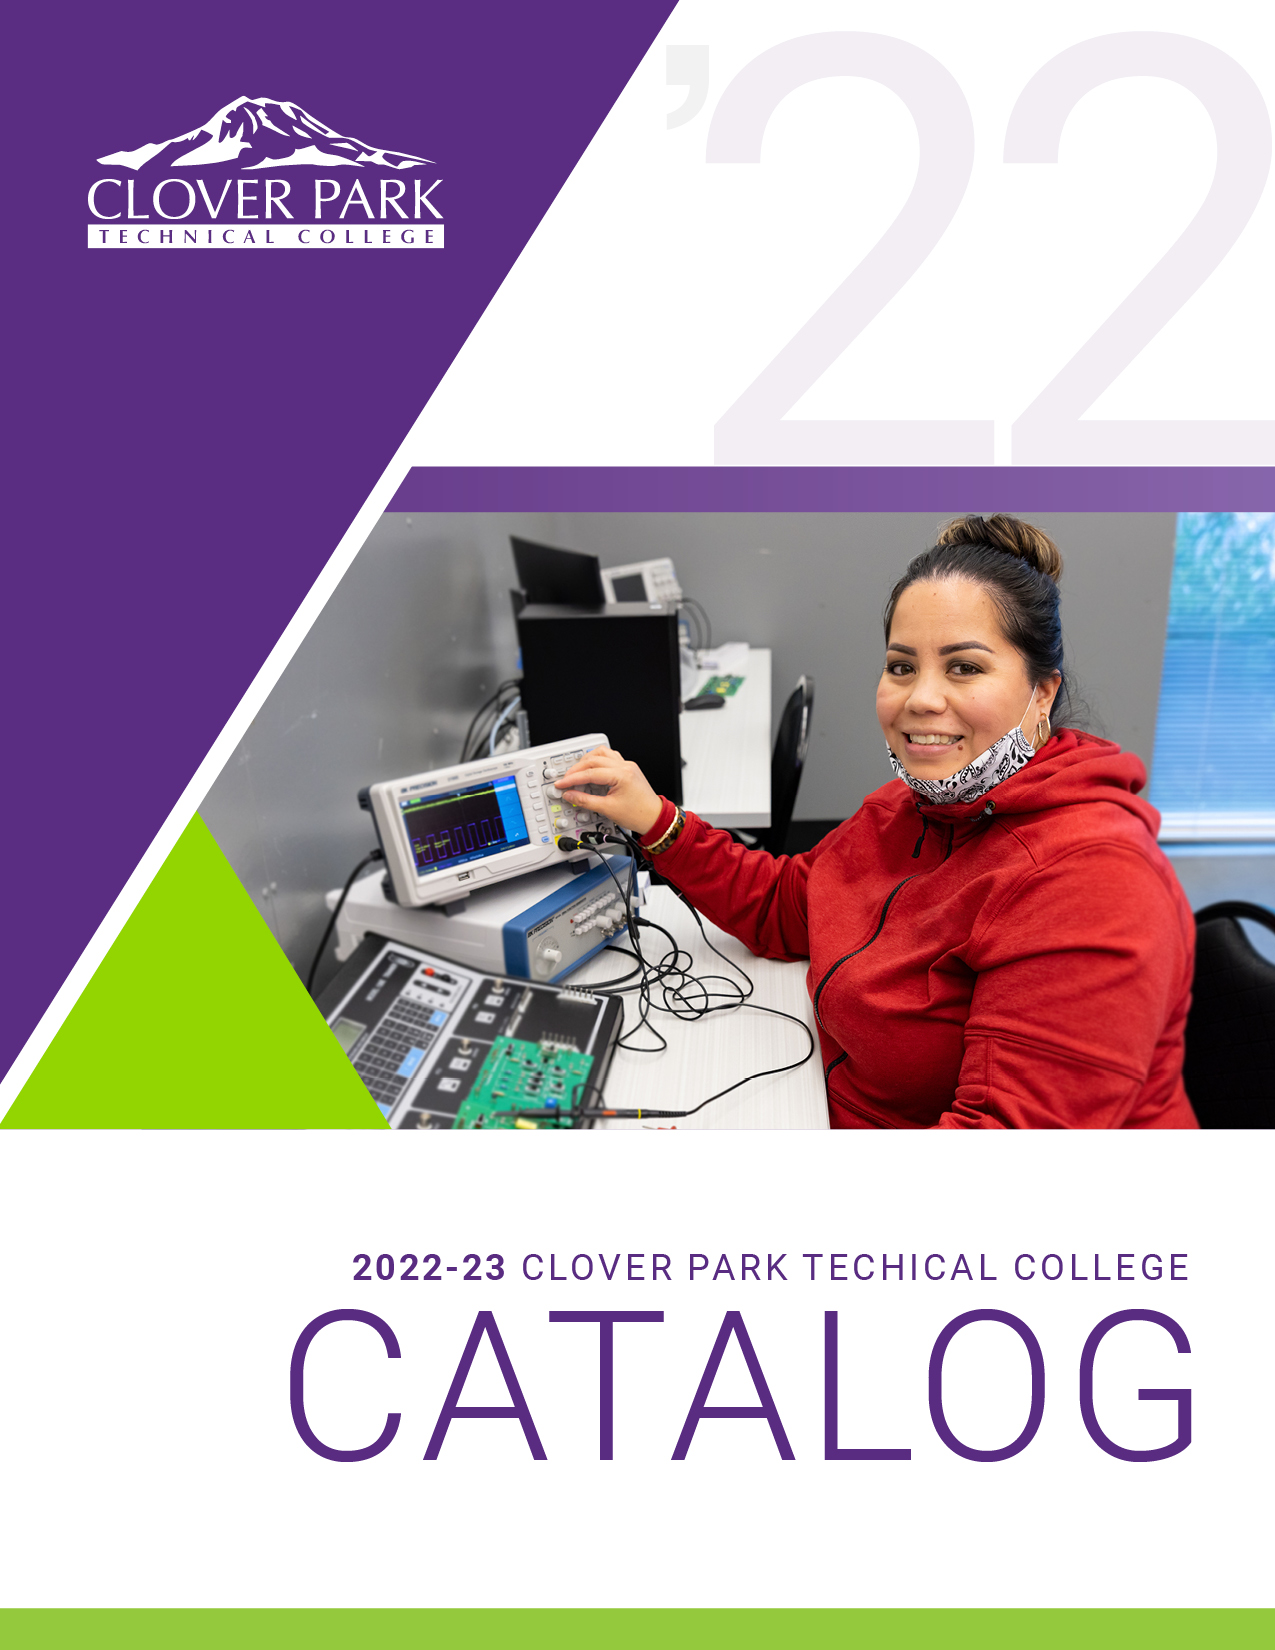 Image of smiling student. 2022-2023 academic catalog Clover Park Technical College